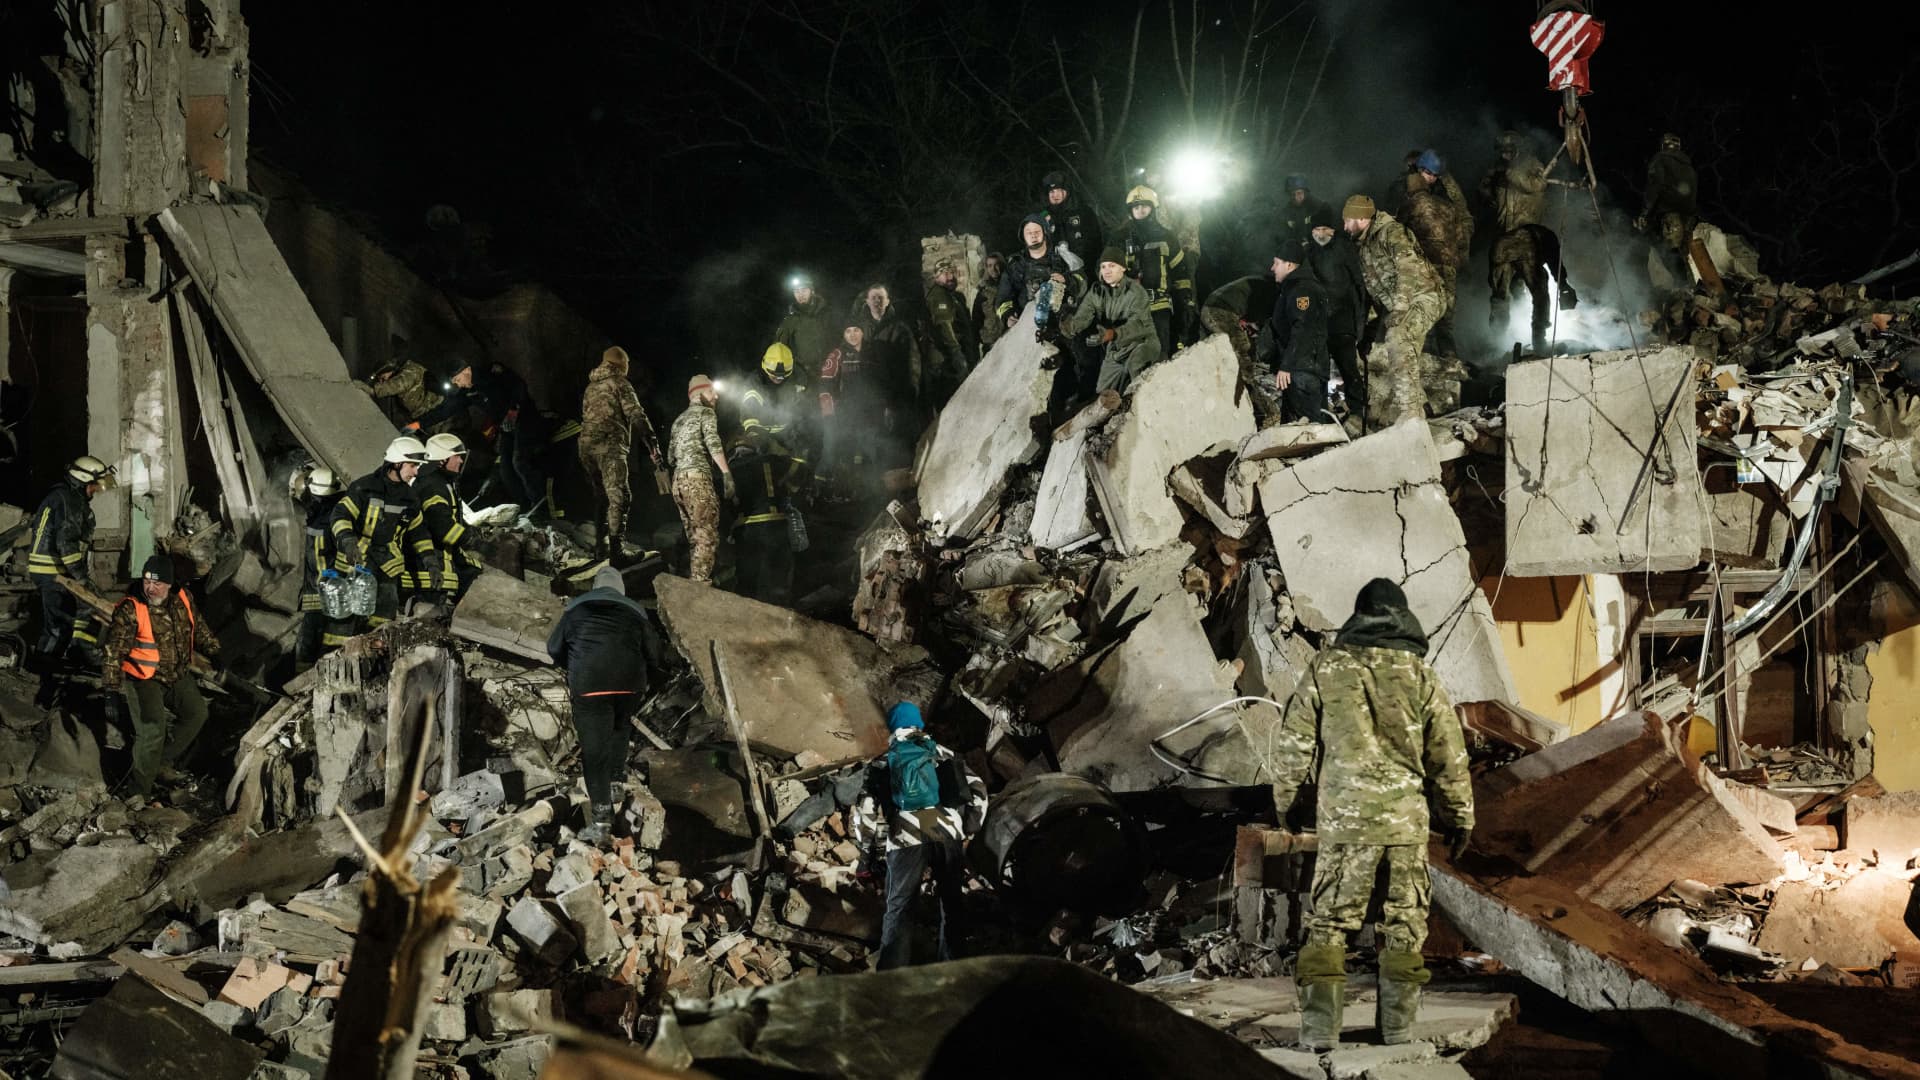 Rescuers remove debris to search for survivors at a destroyed apartment building hit by a rocket during the night in Kramatorsk on February 1, 2023.